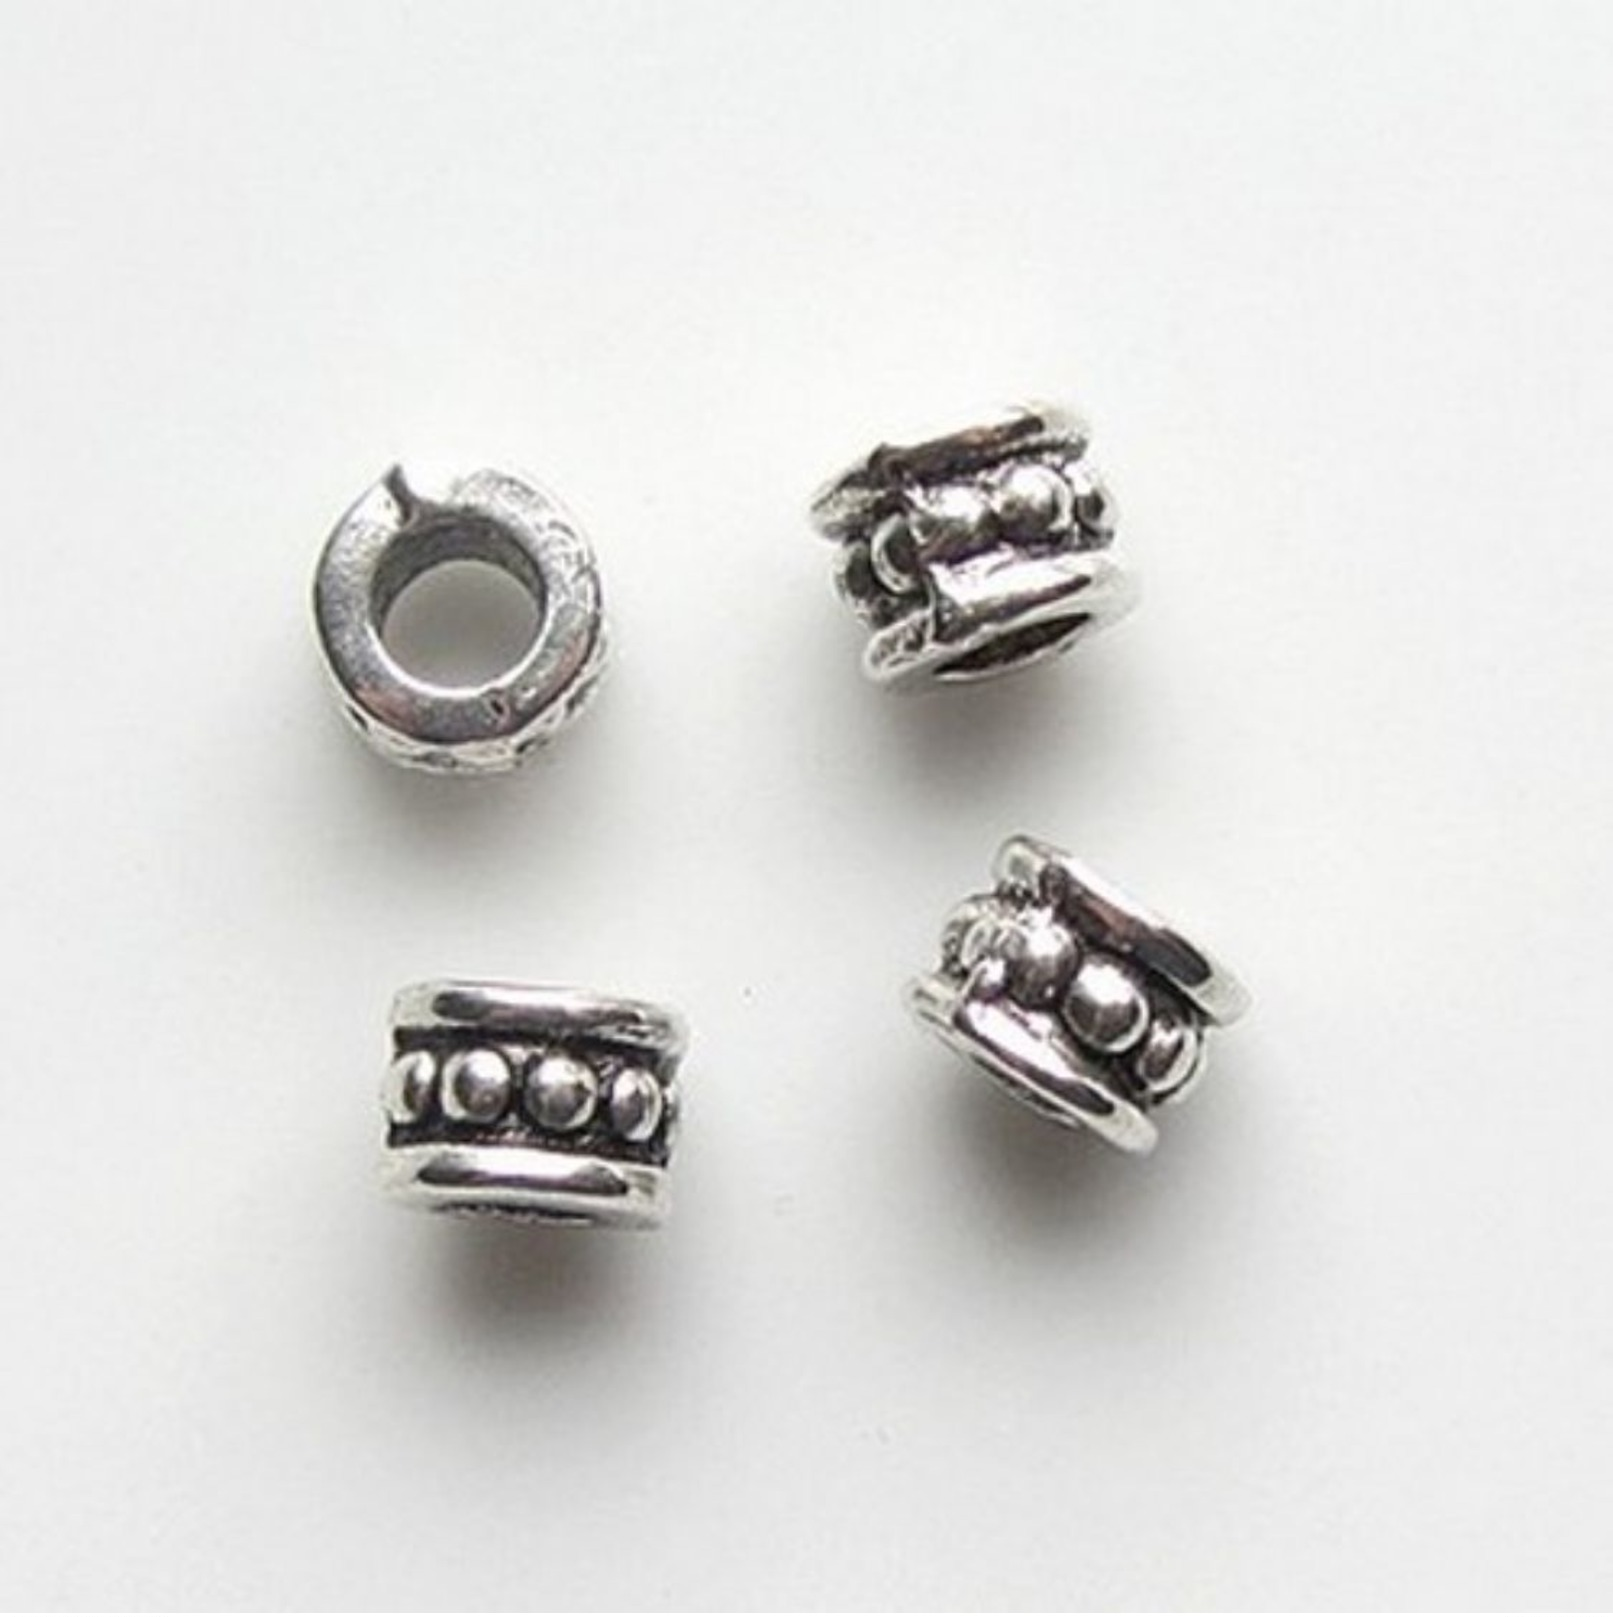 10 Perles Intercalaire Spacer _ CYLINDRE 4.5x6x6mm _ Apprêts Création Bijoux _ A152 - Perles